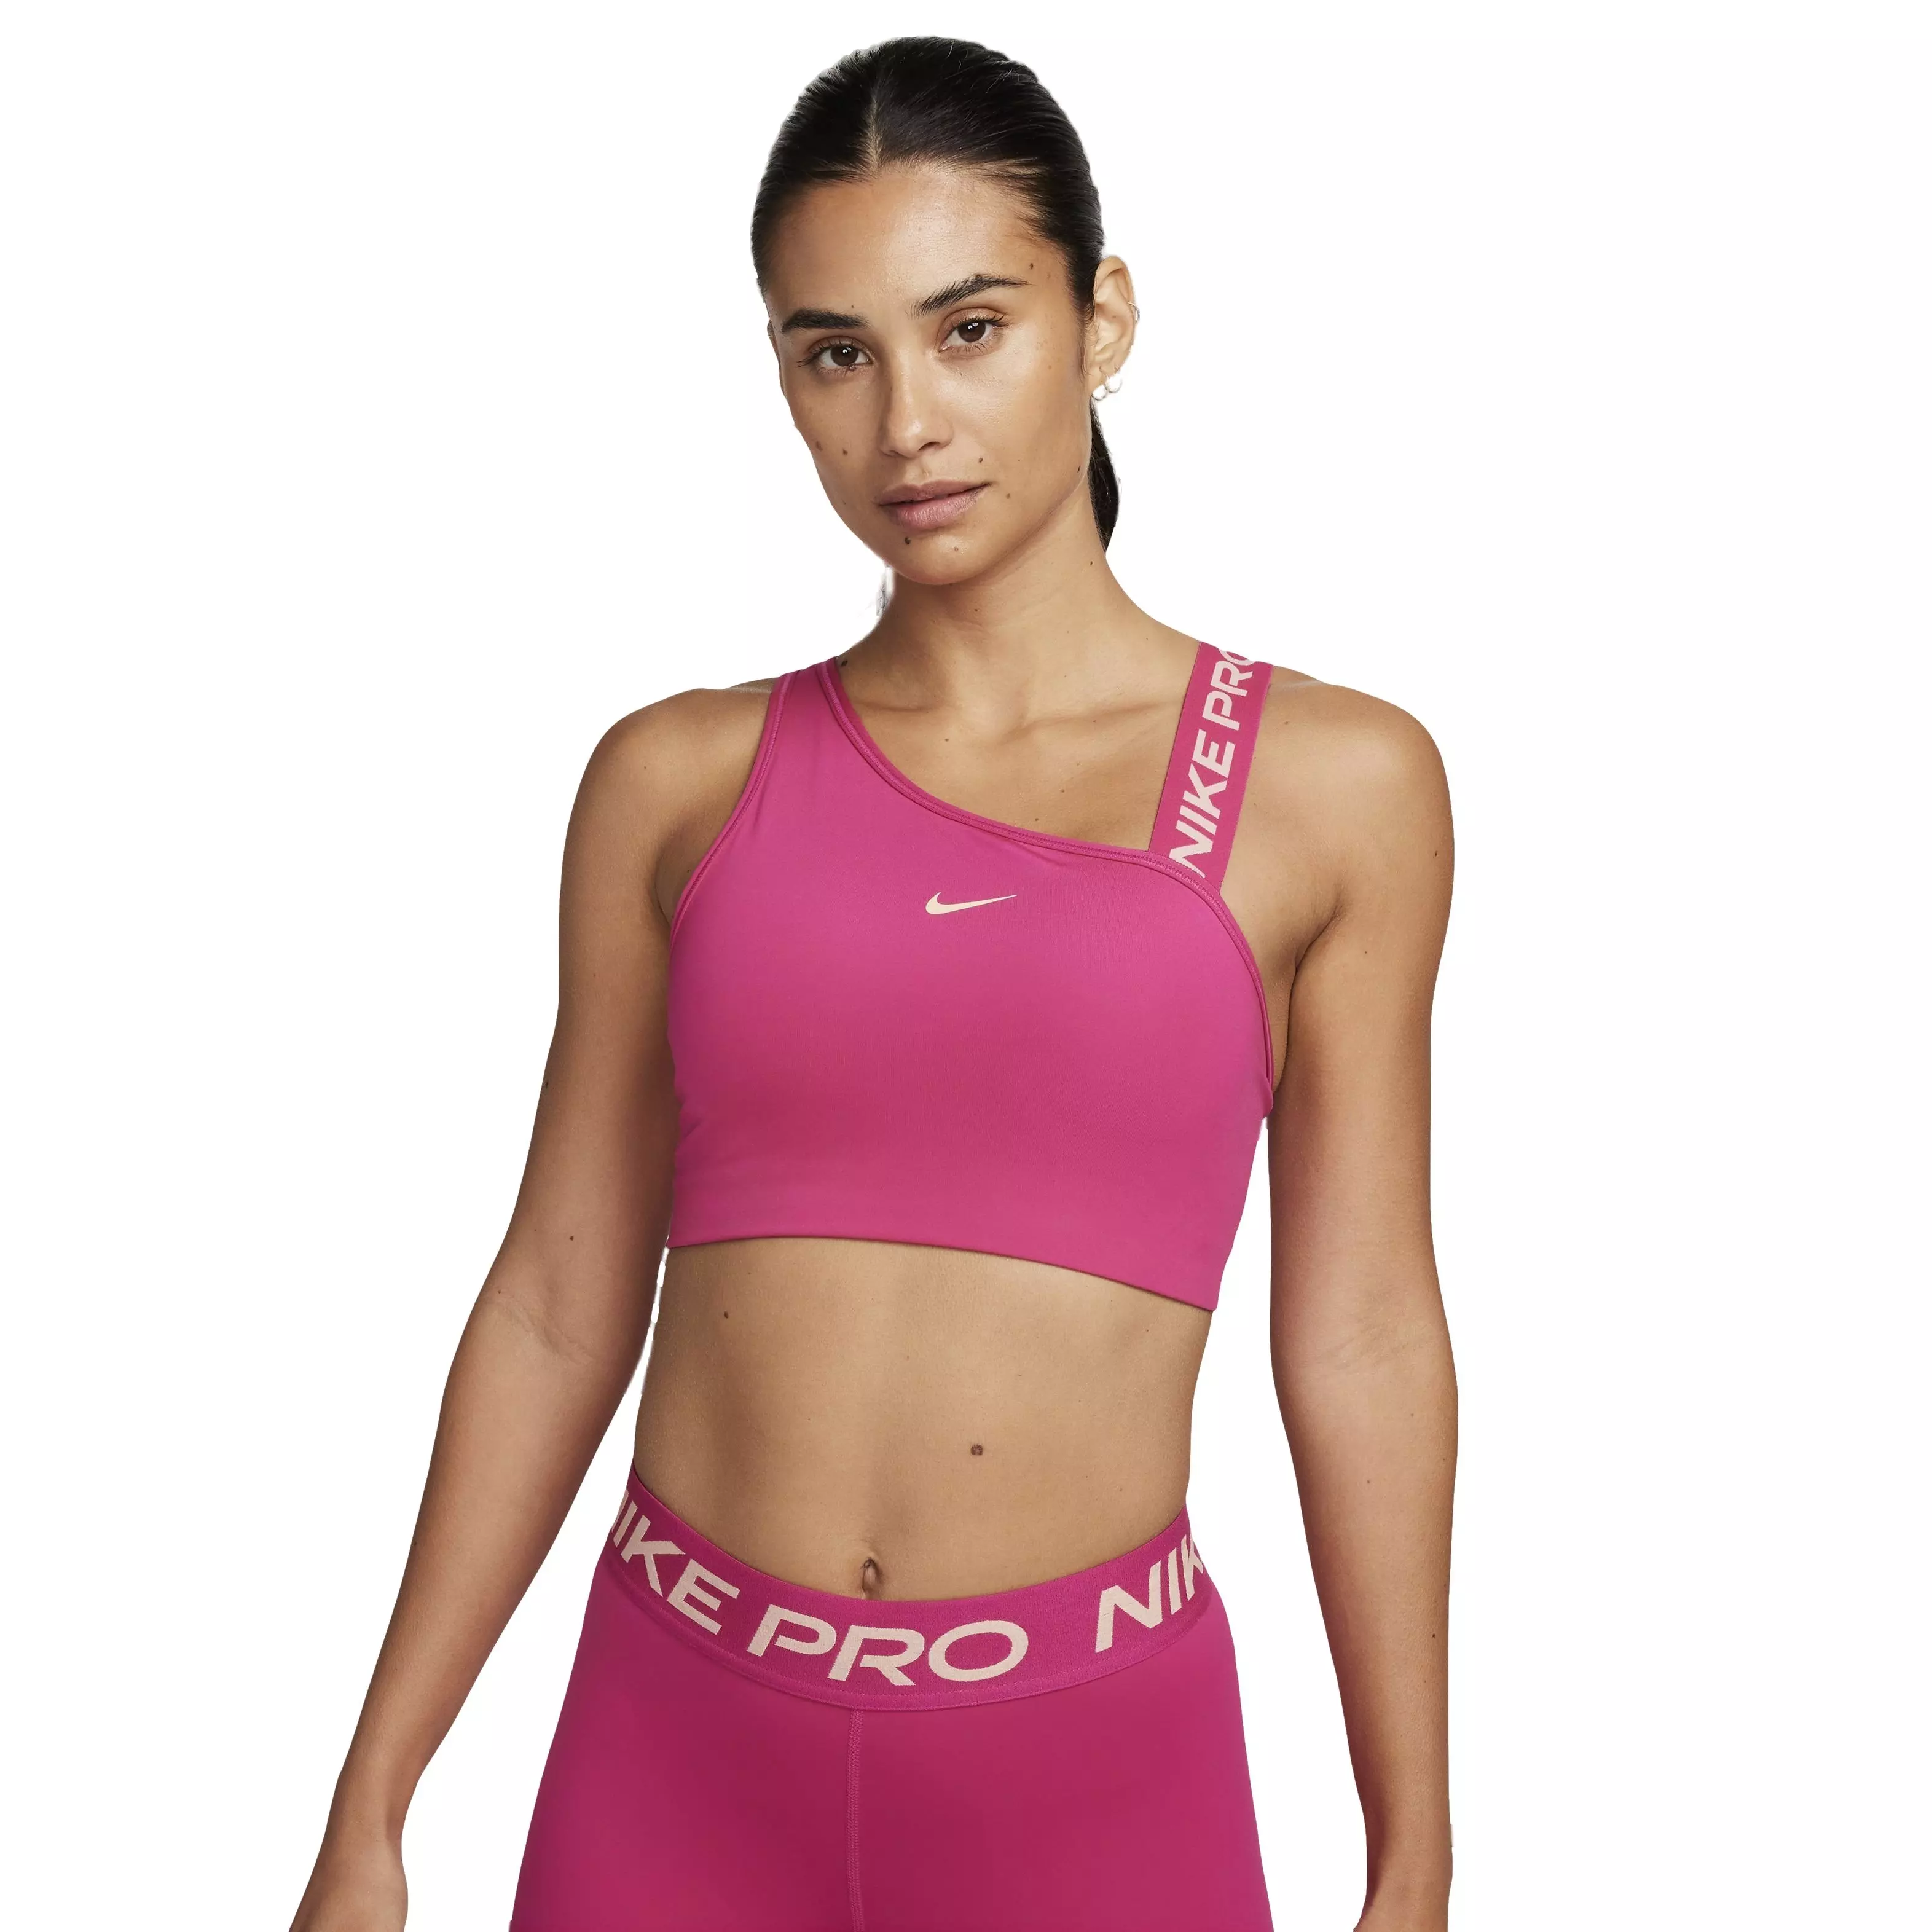 Update your workout look with this PUMA Sports Bra 2-Pack for $10